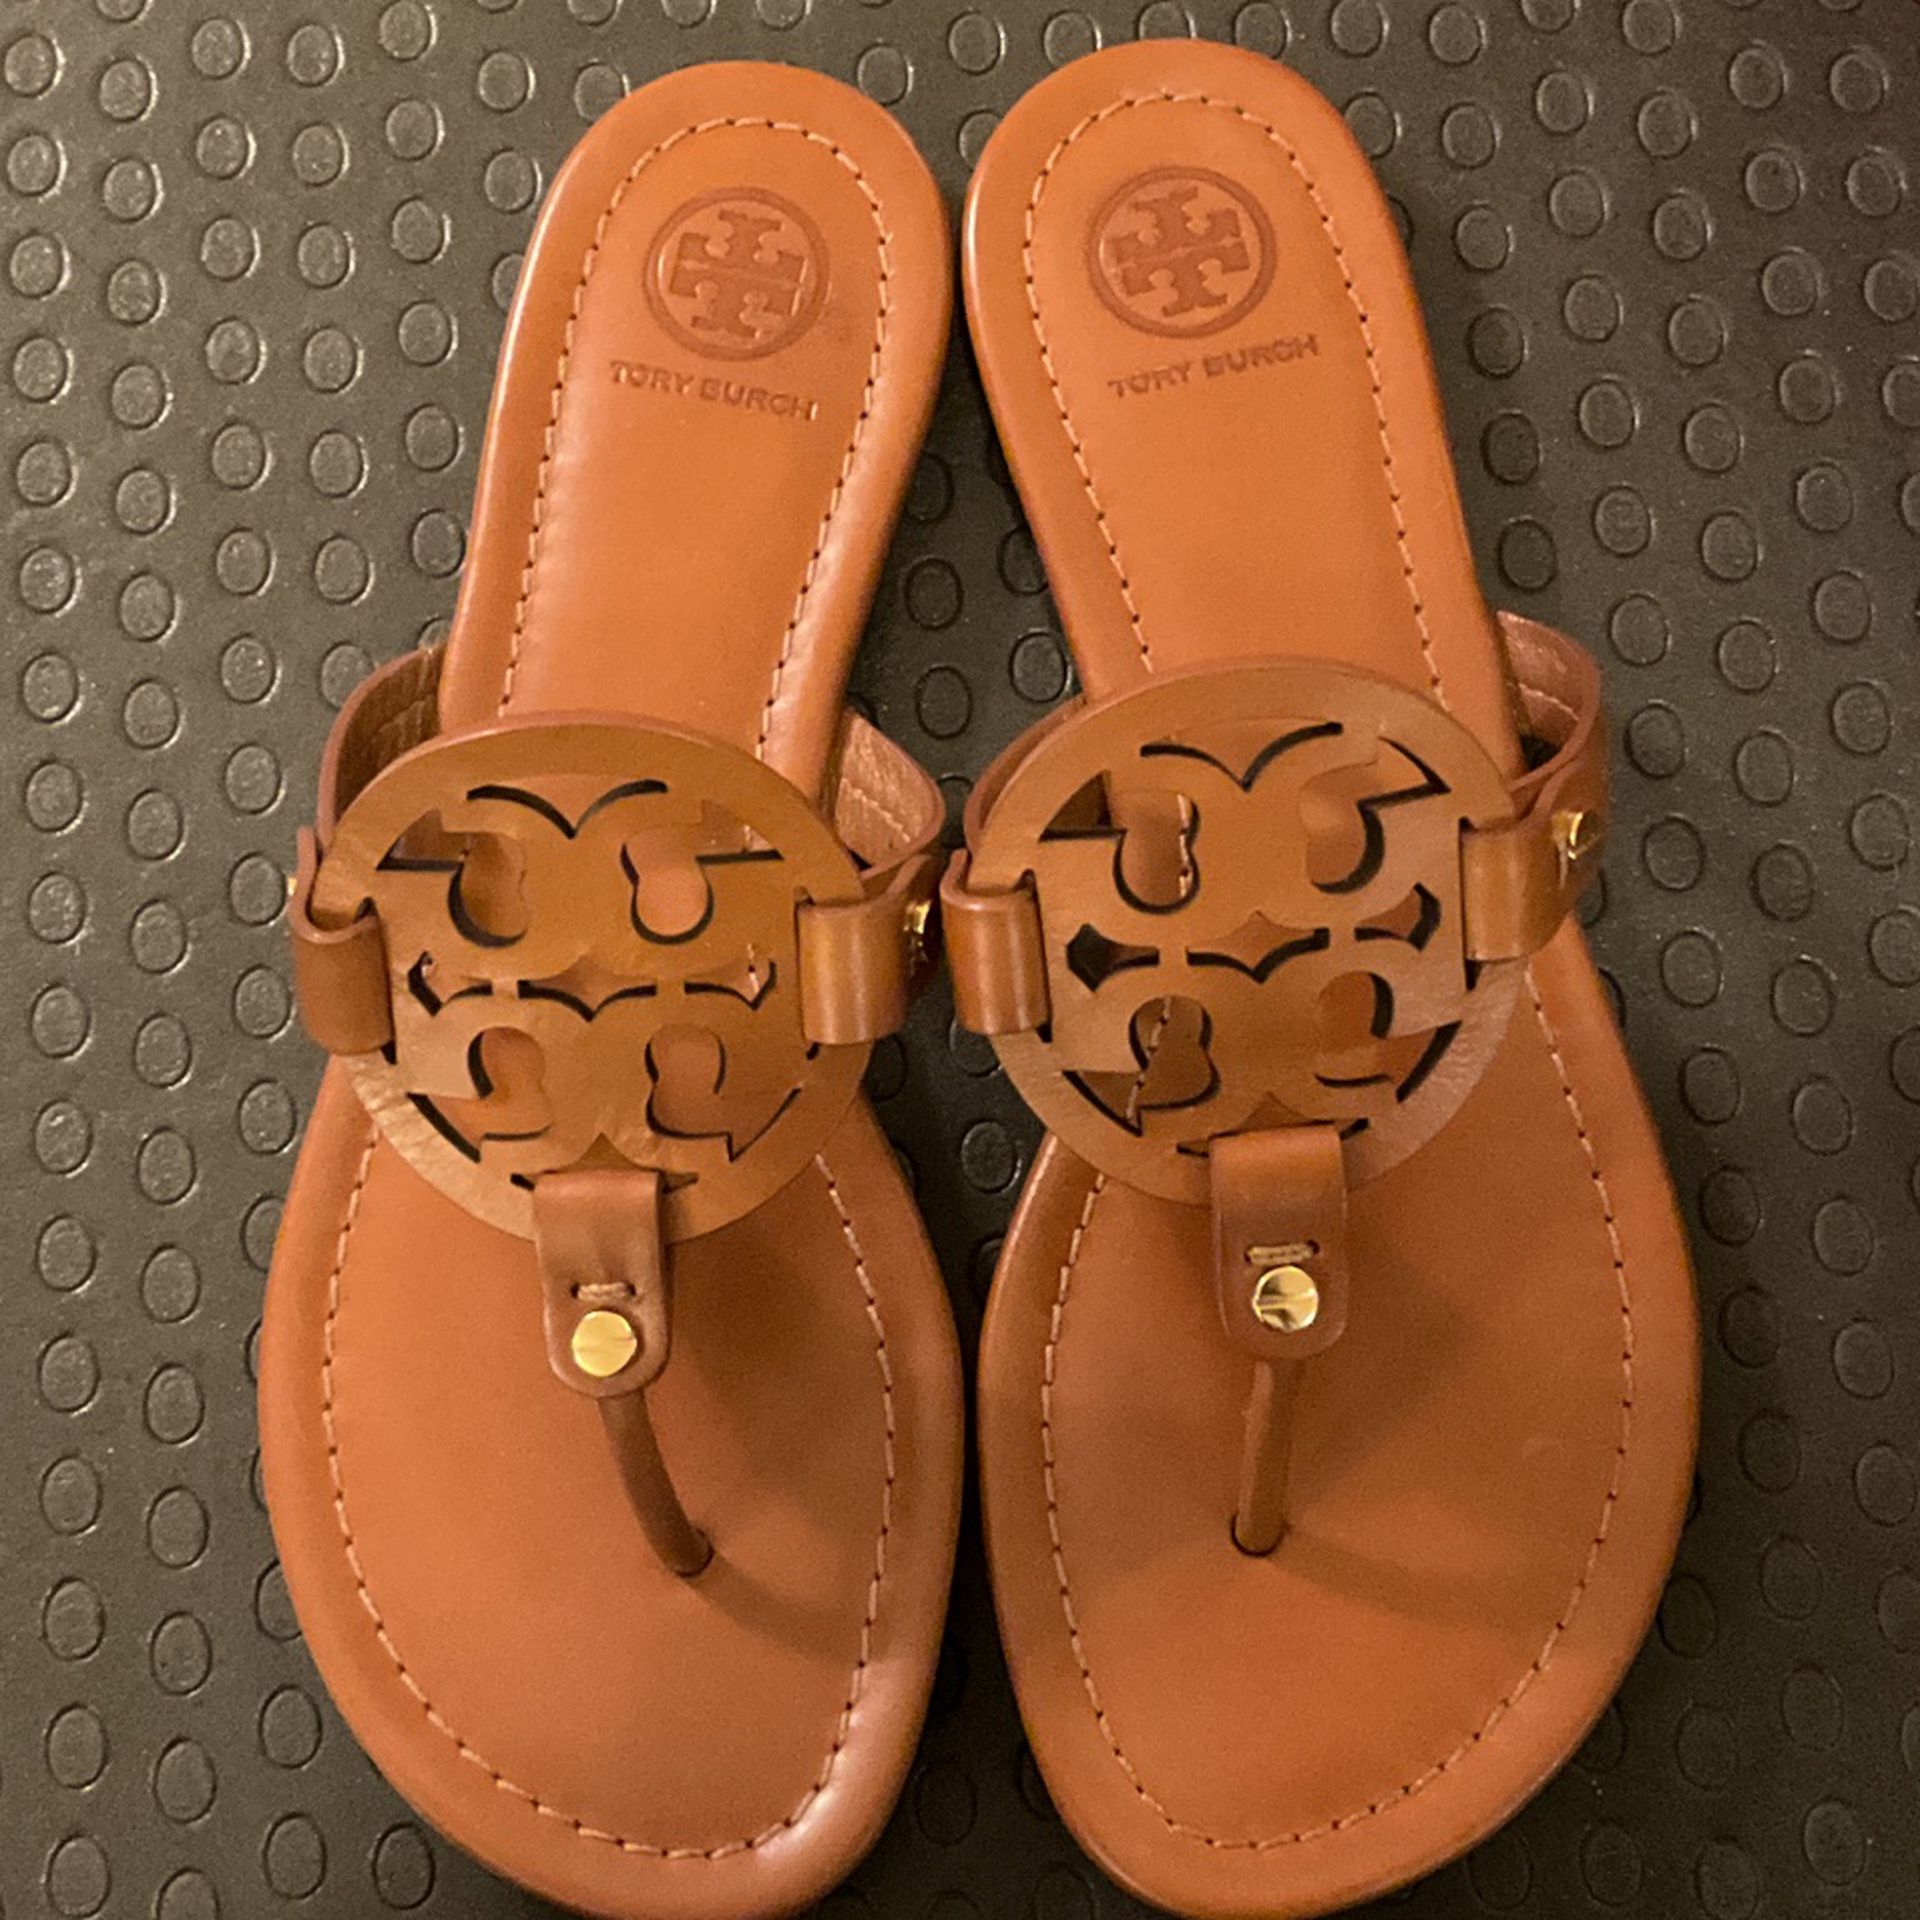 New Tory Burch Sandals for Sale in Chandler, AZ - OfferUp